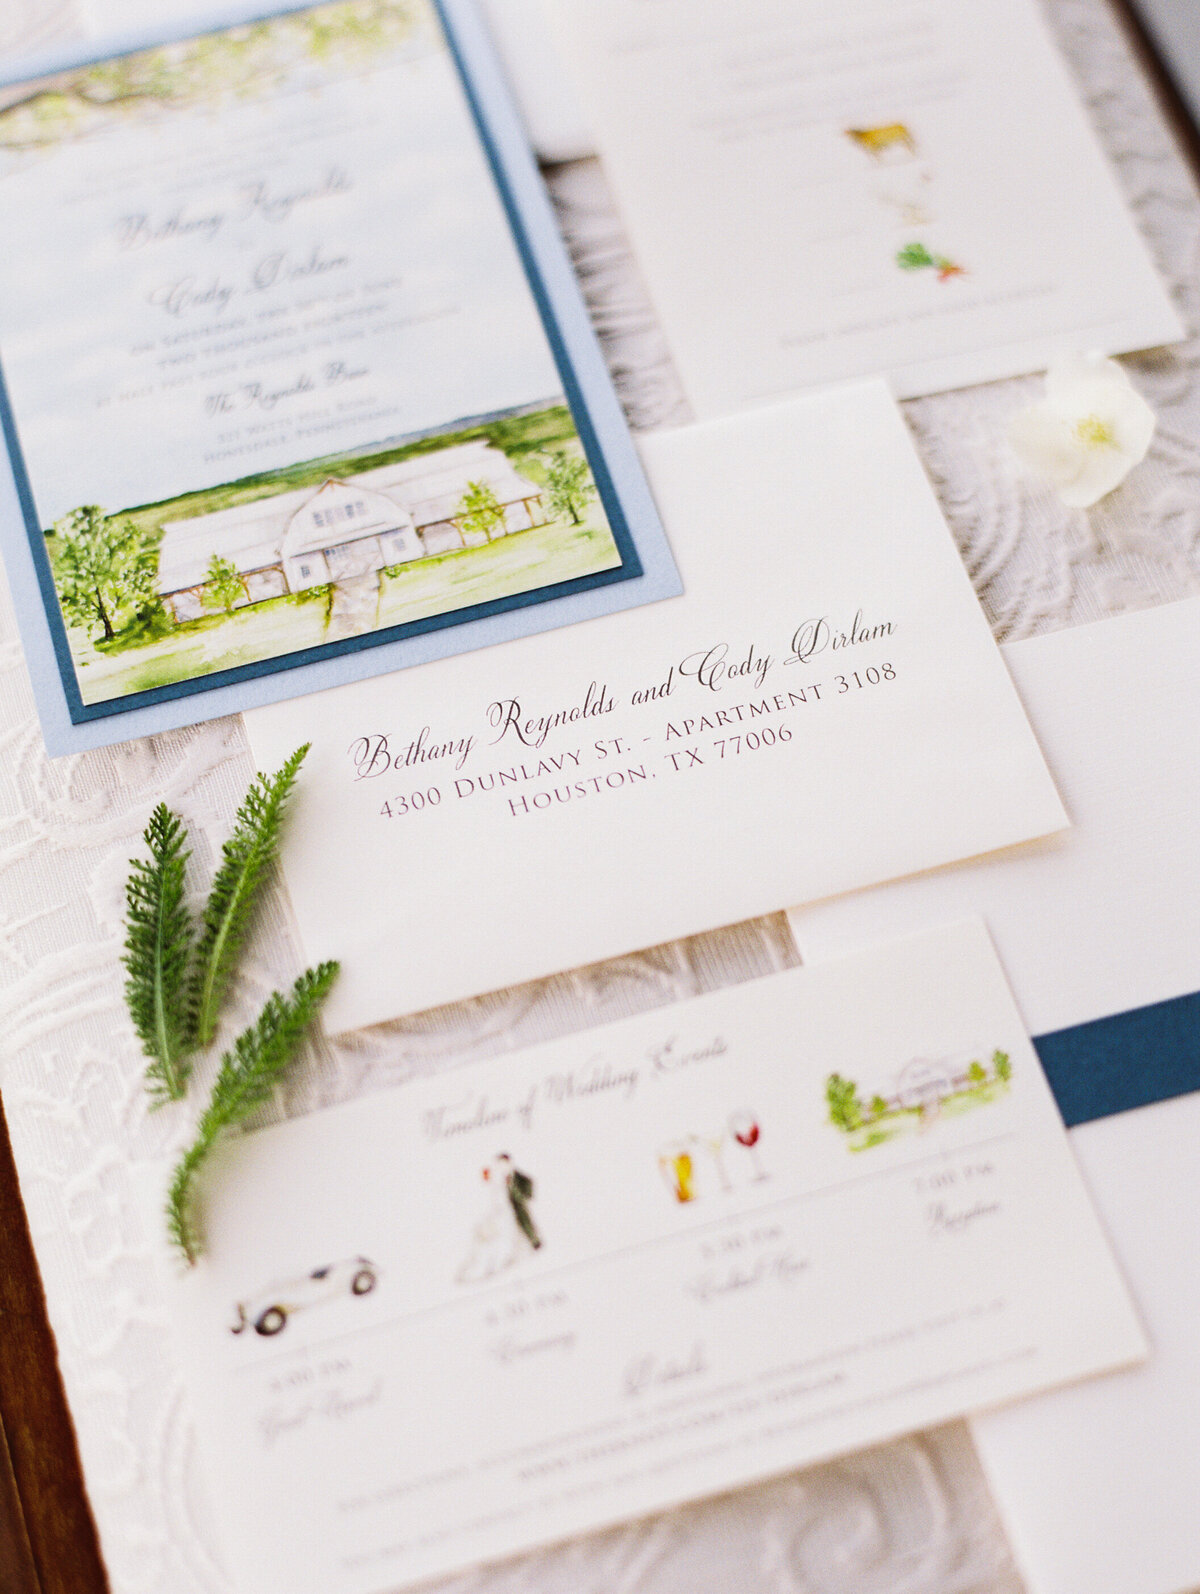 Close-up of wedding stationery with detail cards